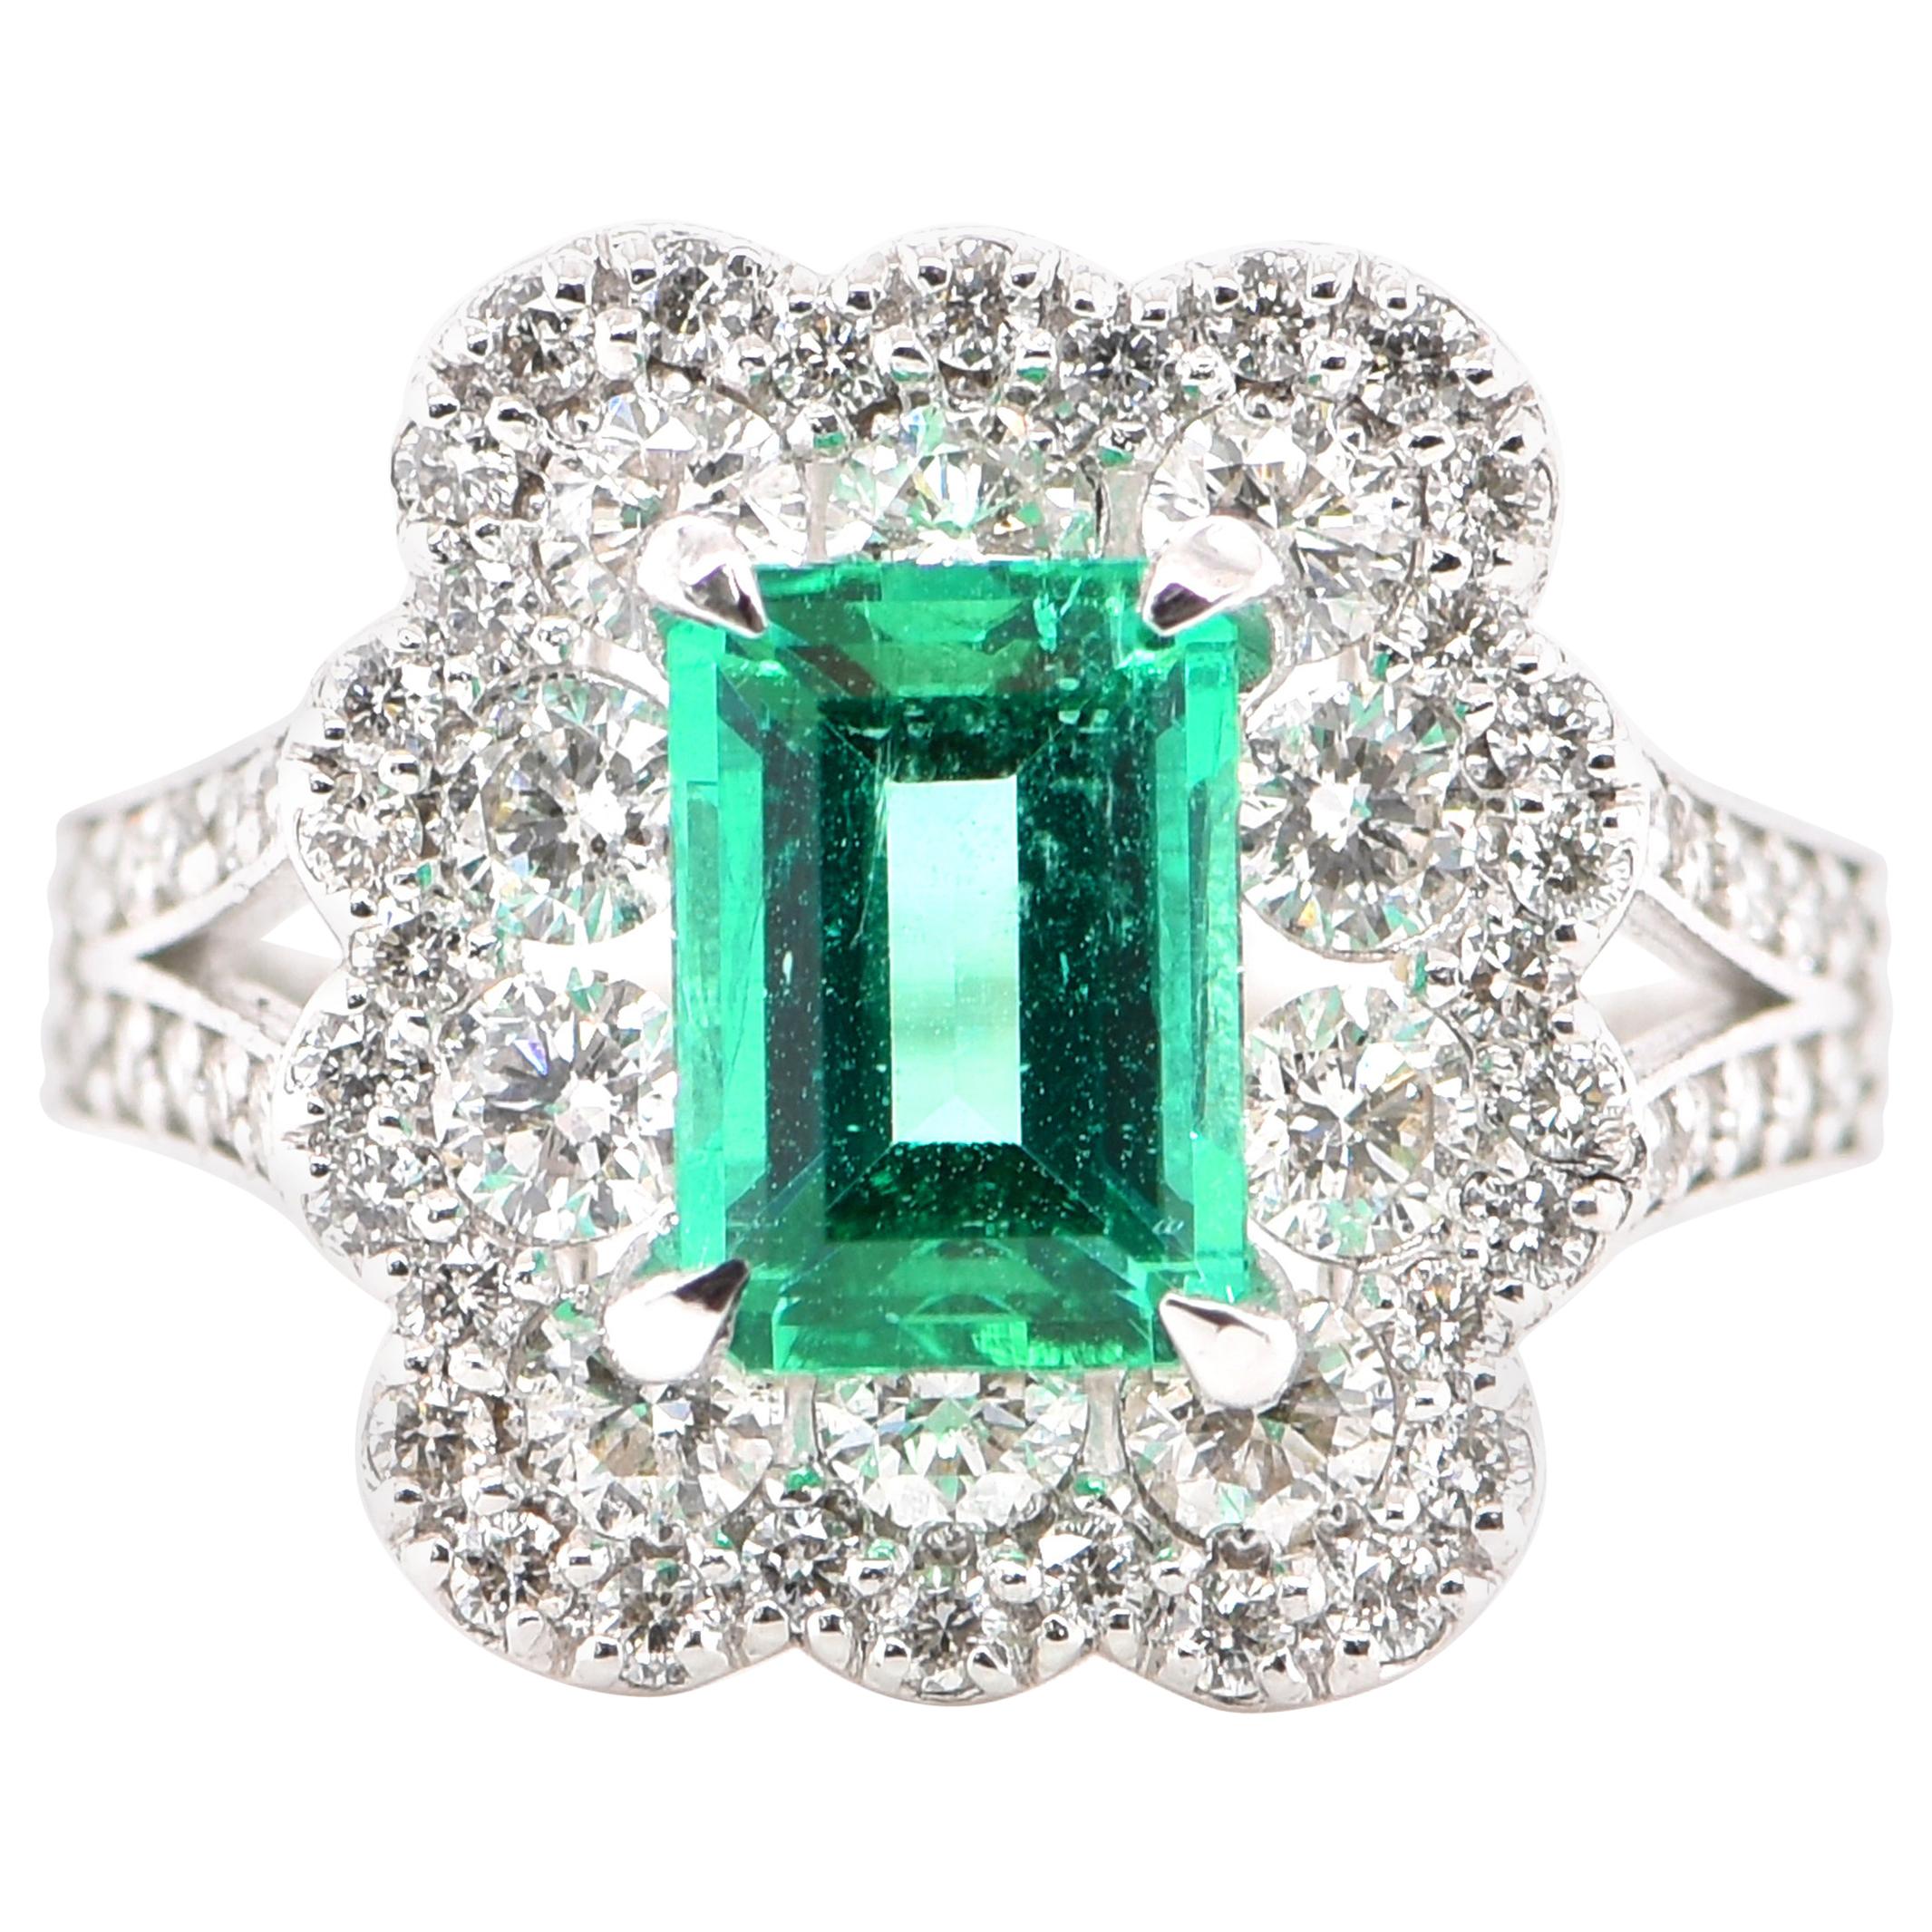 GIA Certified 1.23 Carat Natural Colombian Emerald Ring Set in Platinum